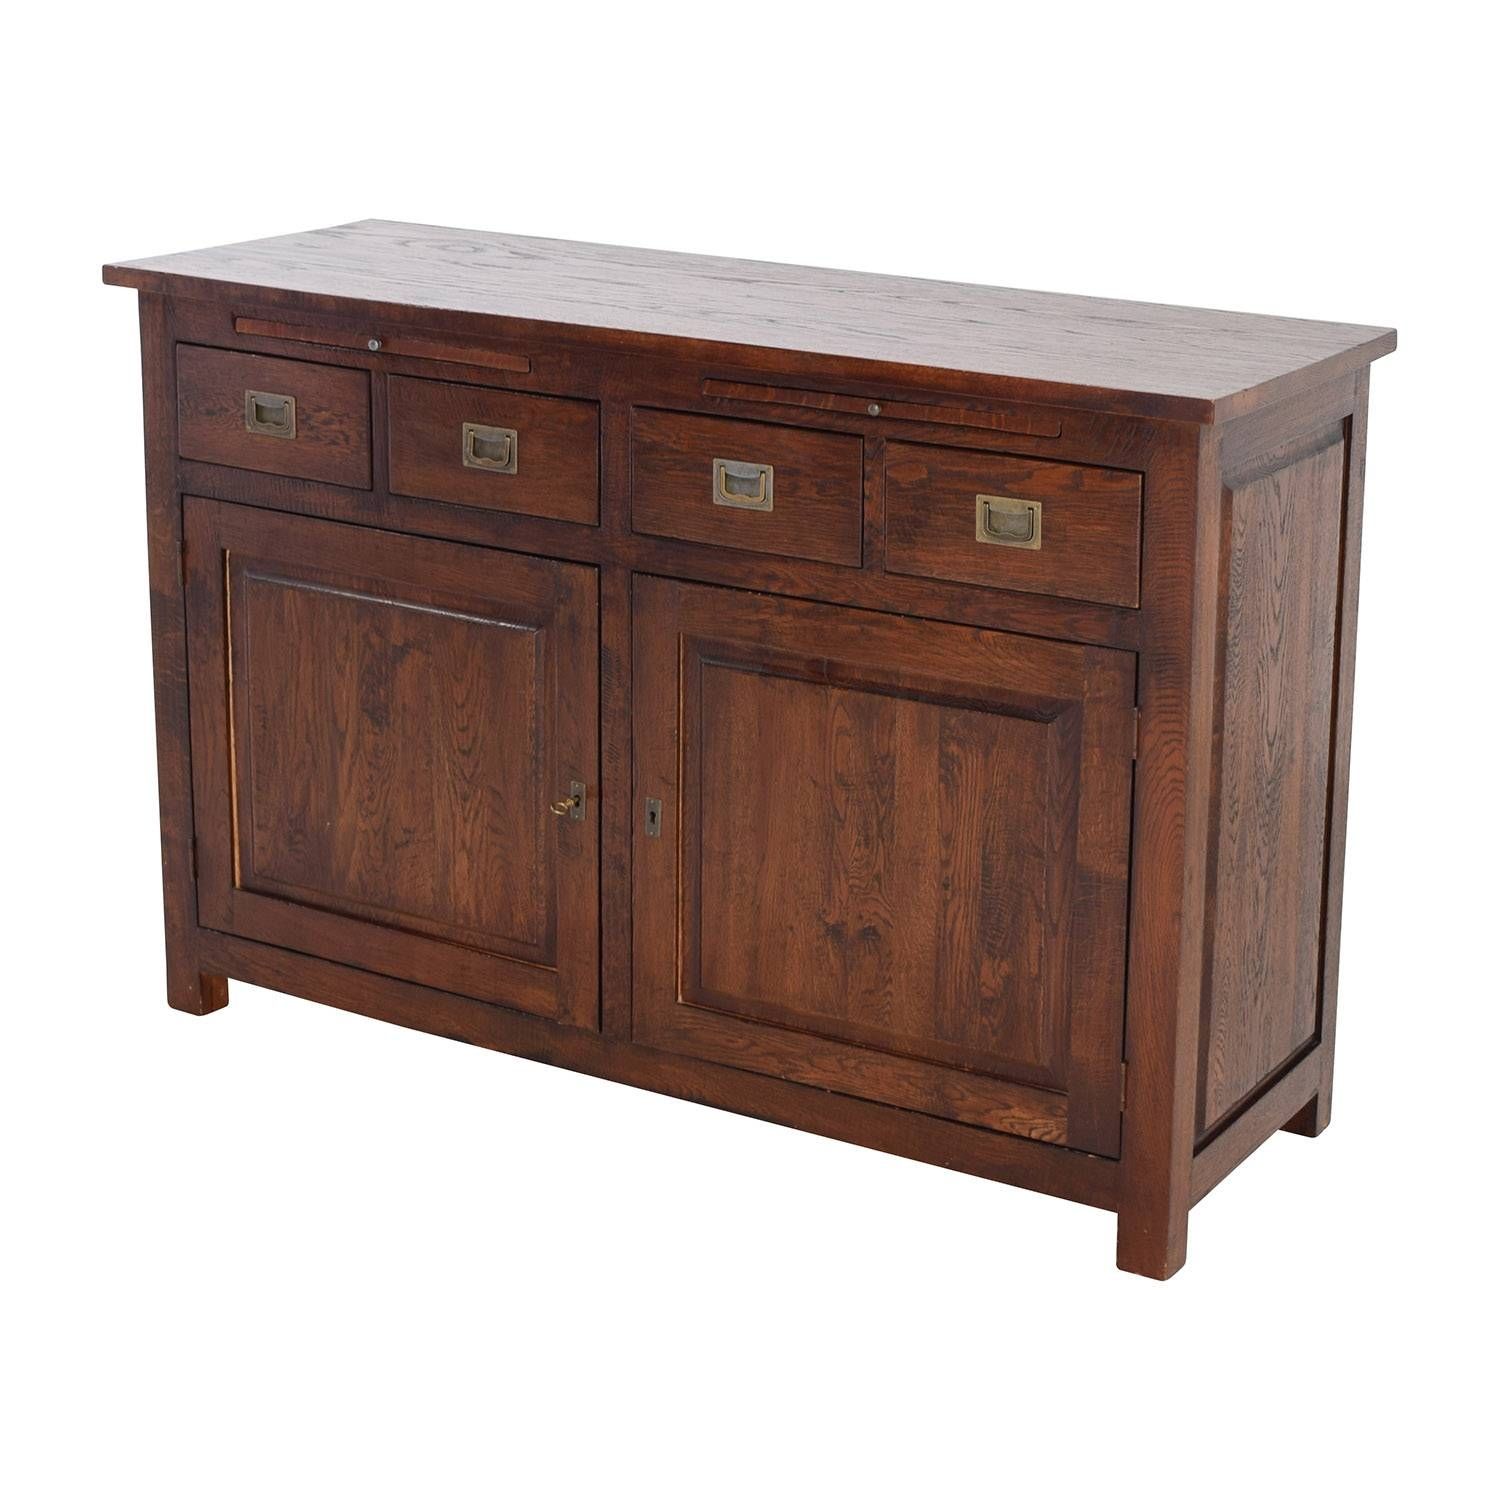 67% Off – Crate And Barrel Crate & Barrel Bordeaux Buffet Throughout Latest Crate And Barrel Sideboards (Photo 5 of 15)